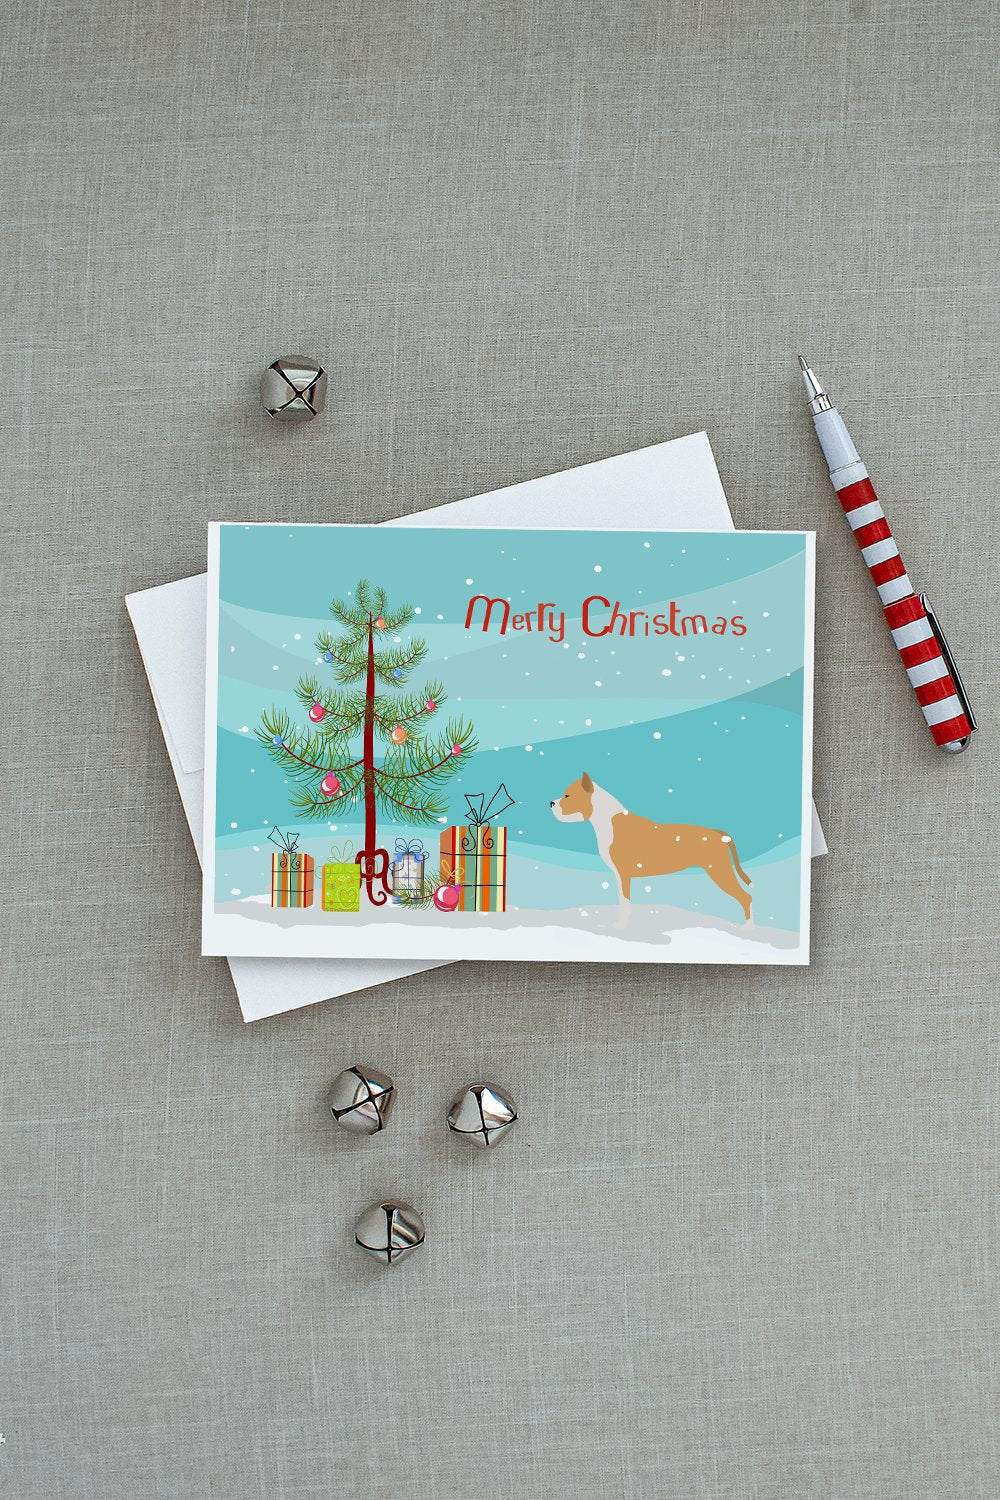 Staffordshire Bull Terrier Merry Christmas Tree Greeting Cards and Envelopes Pack of 8 - the-store.com